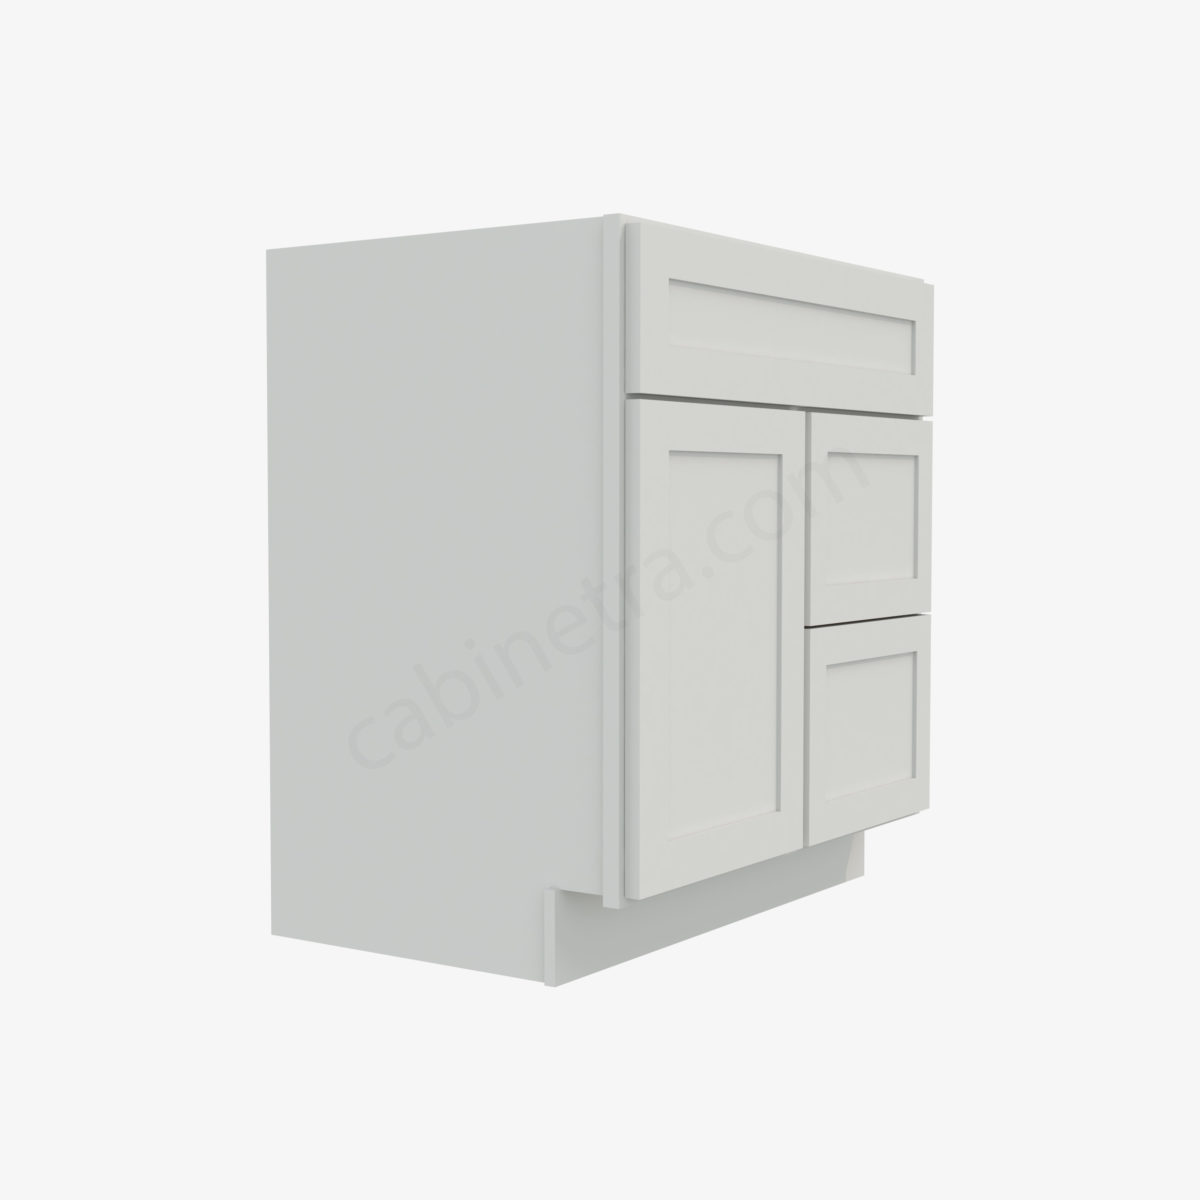 AW S3021DR 34 4 Forevermark Ice White Shaker Cabinetra scaled